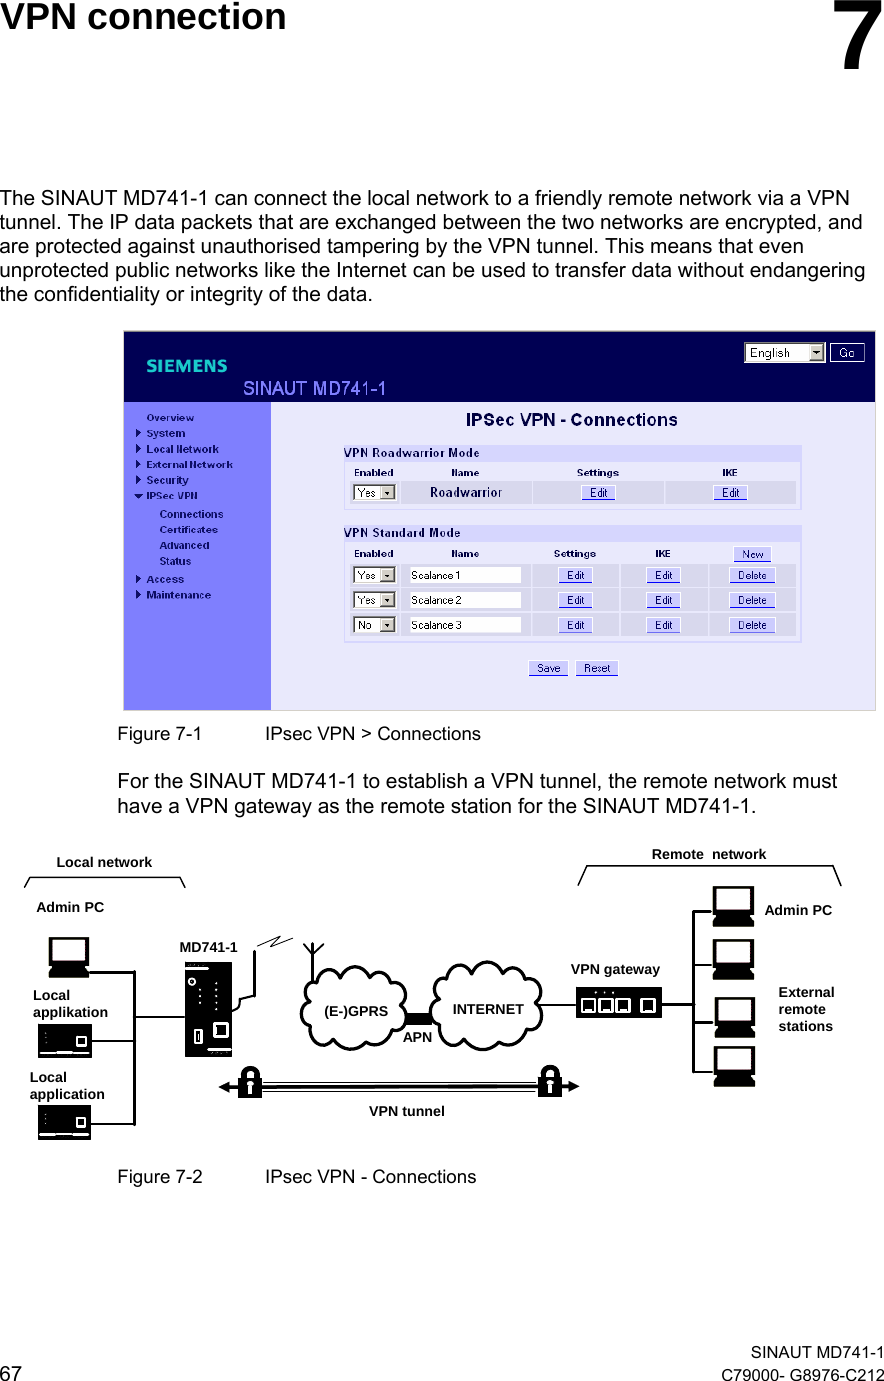   SINAUT MD741-1 67  C79000- G8976-C212    VPN connection  7 The SINAUT MD741-1 can connect the local network to a friendly remote network via a VPN tunnel. The IP data packets that are exchanged between the two networks are encrypted, and are protected against unauthorised tampering by the VPN tunnel. This means that even unprotected public networks like the Internet can be used to transfer data without endangering the confidentiality or integrity of the data.    Figure 7-1  IPsec VPN &gt; Connections For the SINAUT MD741-1 to establish a VPN tunnel, the remote network must have a VPN gateway as the remote station for the SINAUT MD741-1. APN(E-)GPRS INTERNETMD741-1VPN gatewayLocal network Remote  networkLocalapplicationAdmin PCLocalapplikationAdmin PCExternalremotestationsVPN tunnel Figure 7-2  IPsec VPN - Connections  